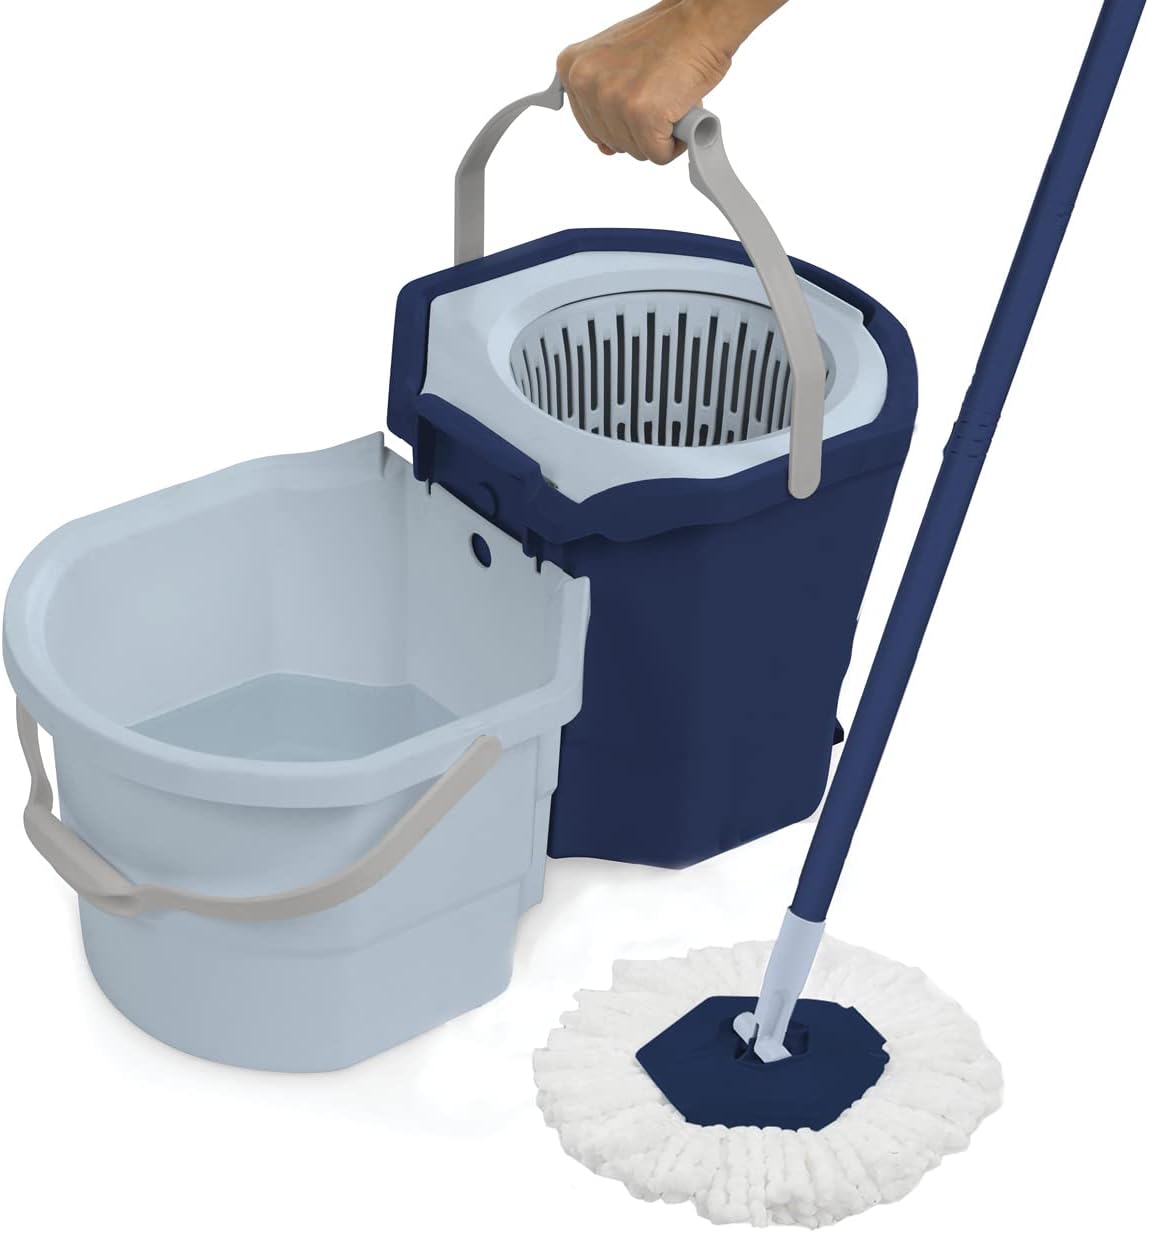  Spin Mop with Separate Clean and Dirty Water, Tsmine